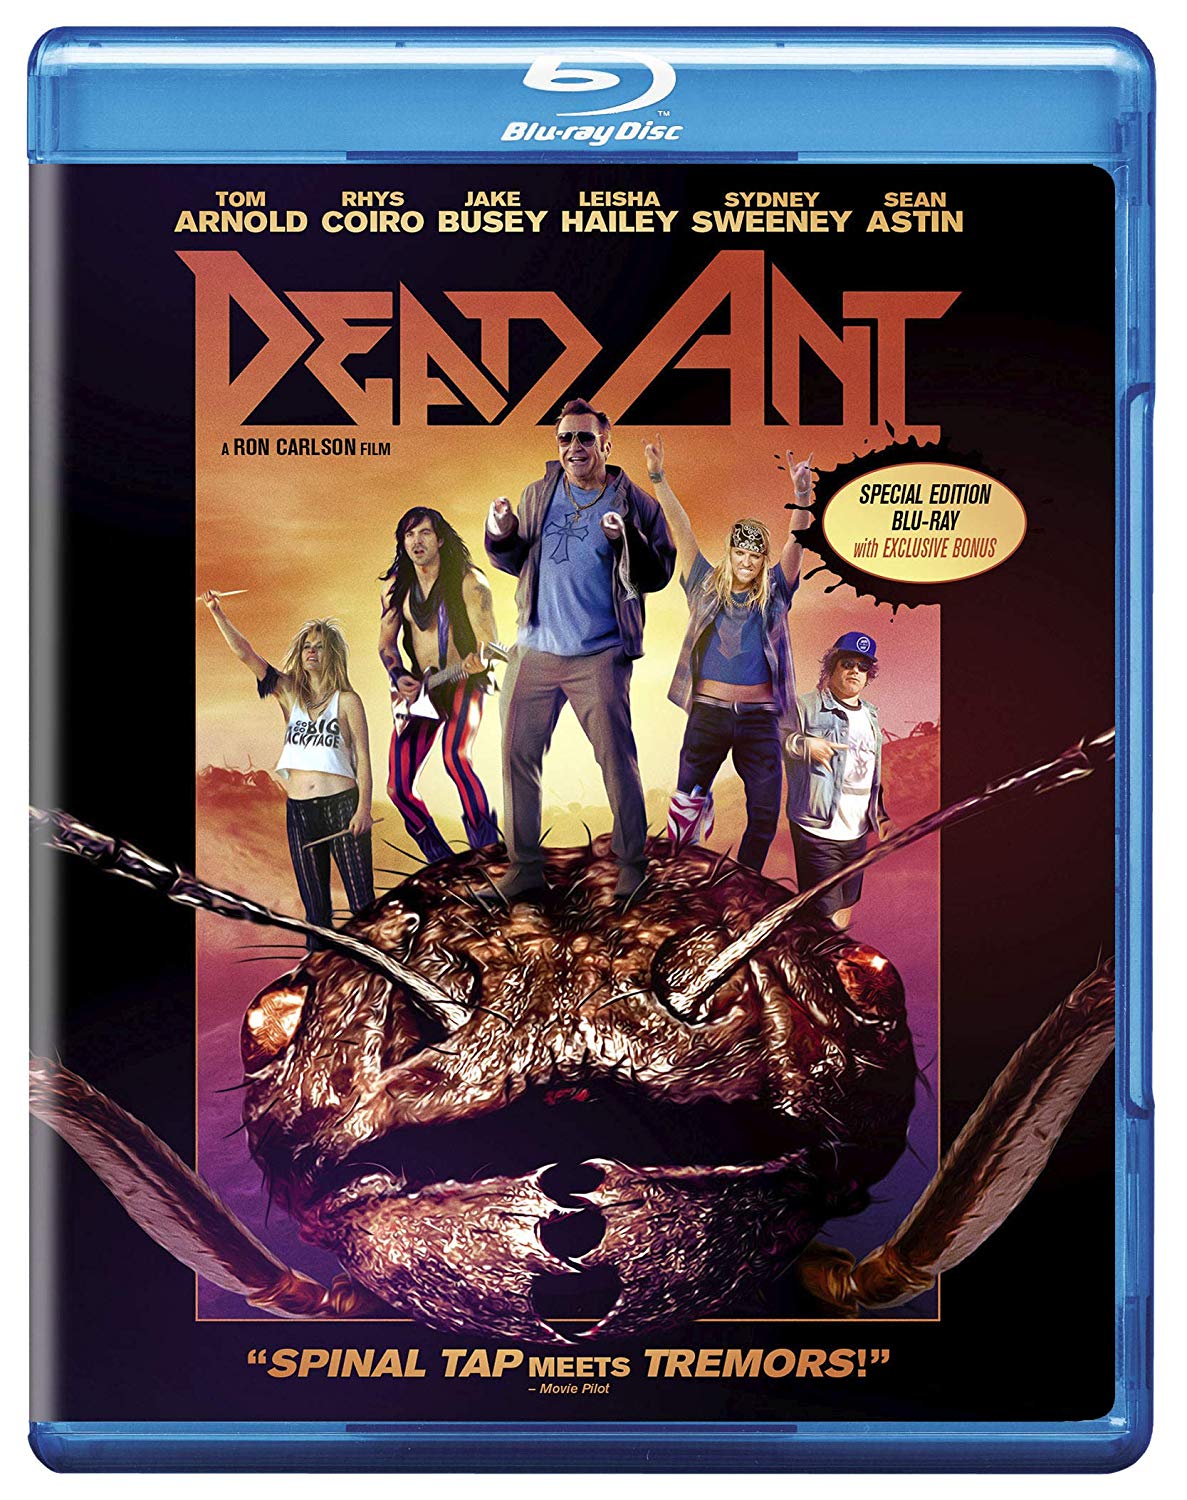 dead ant 2017 download